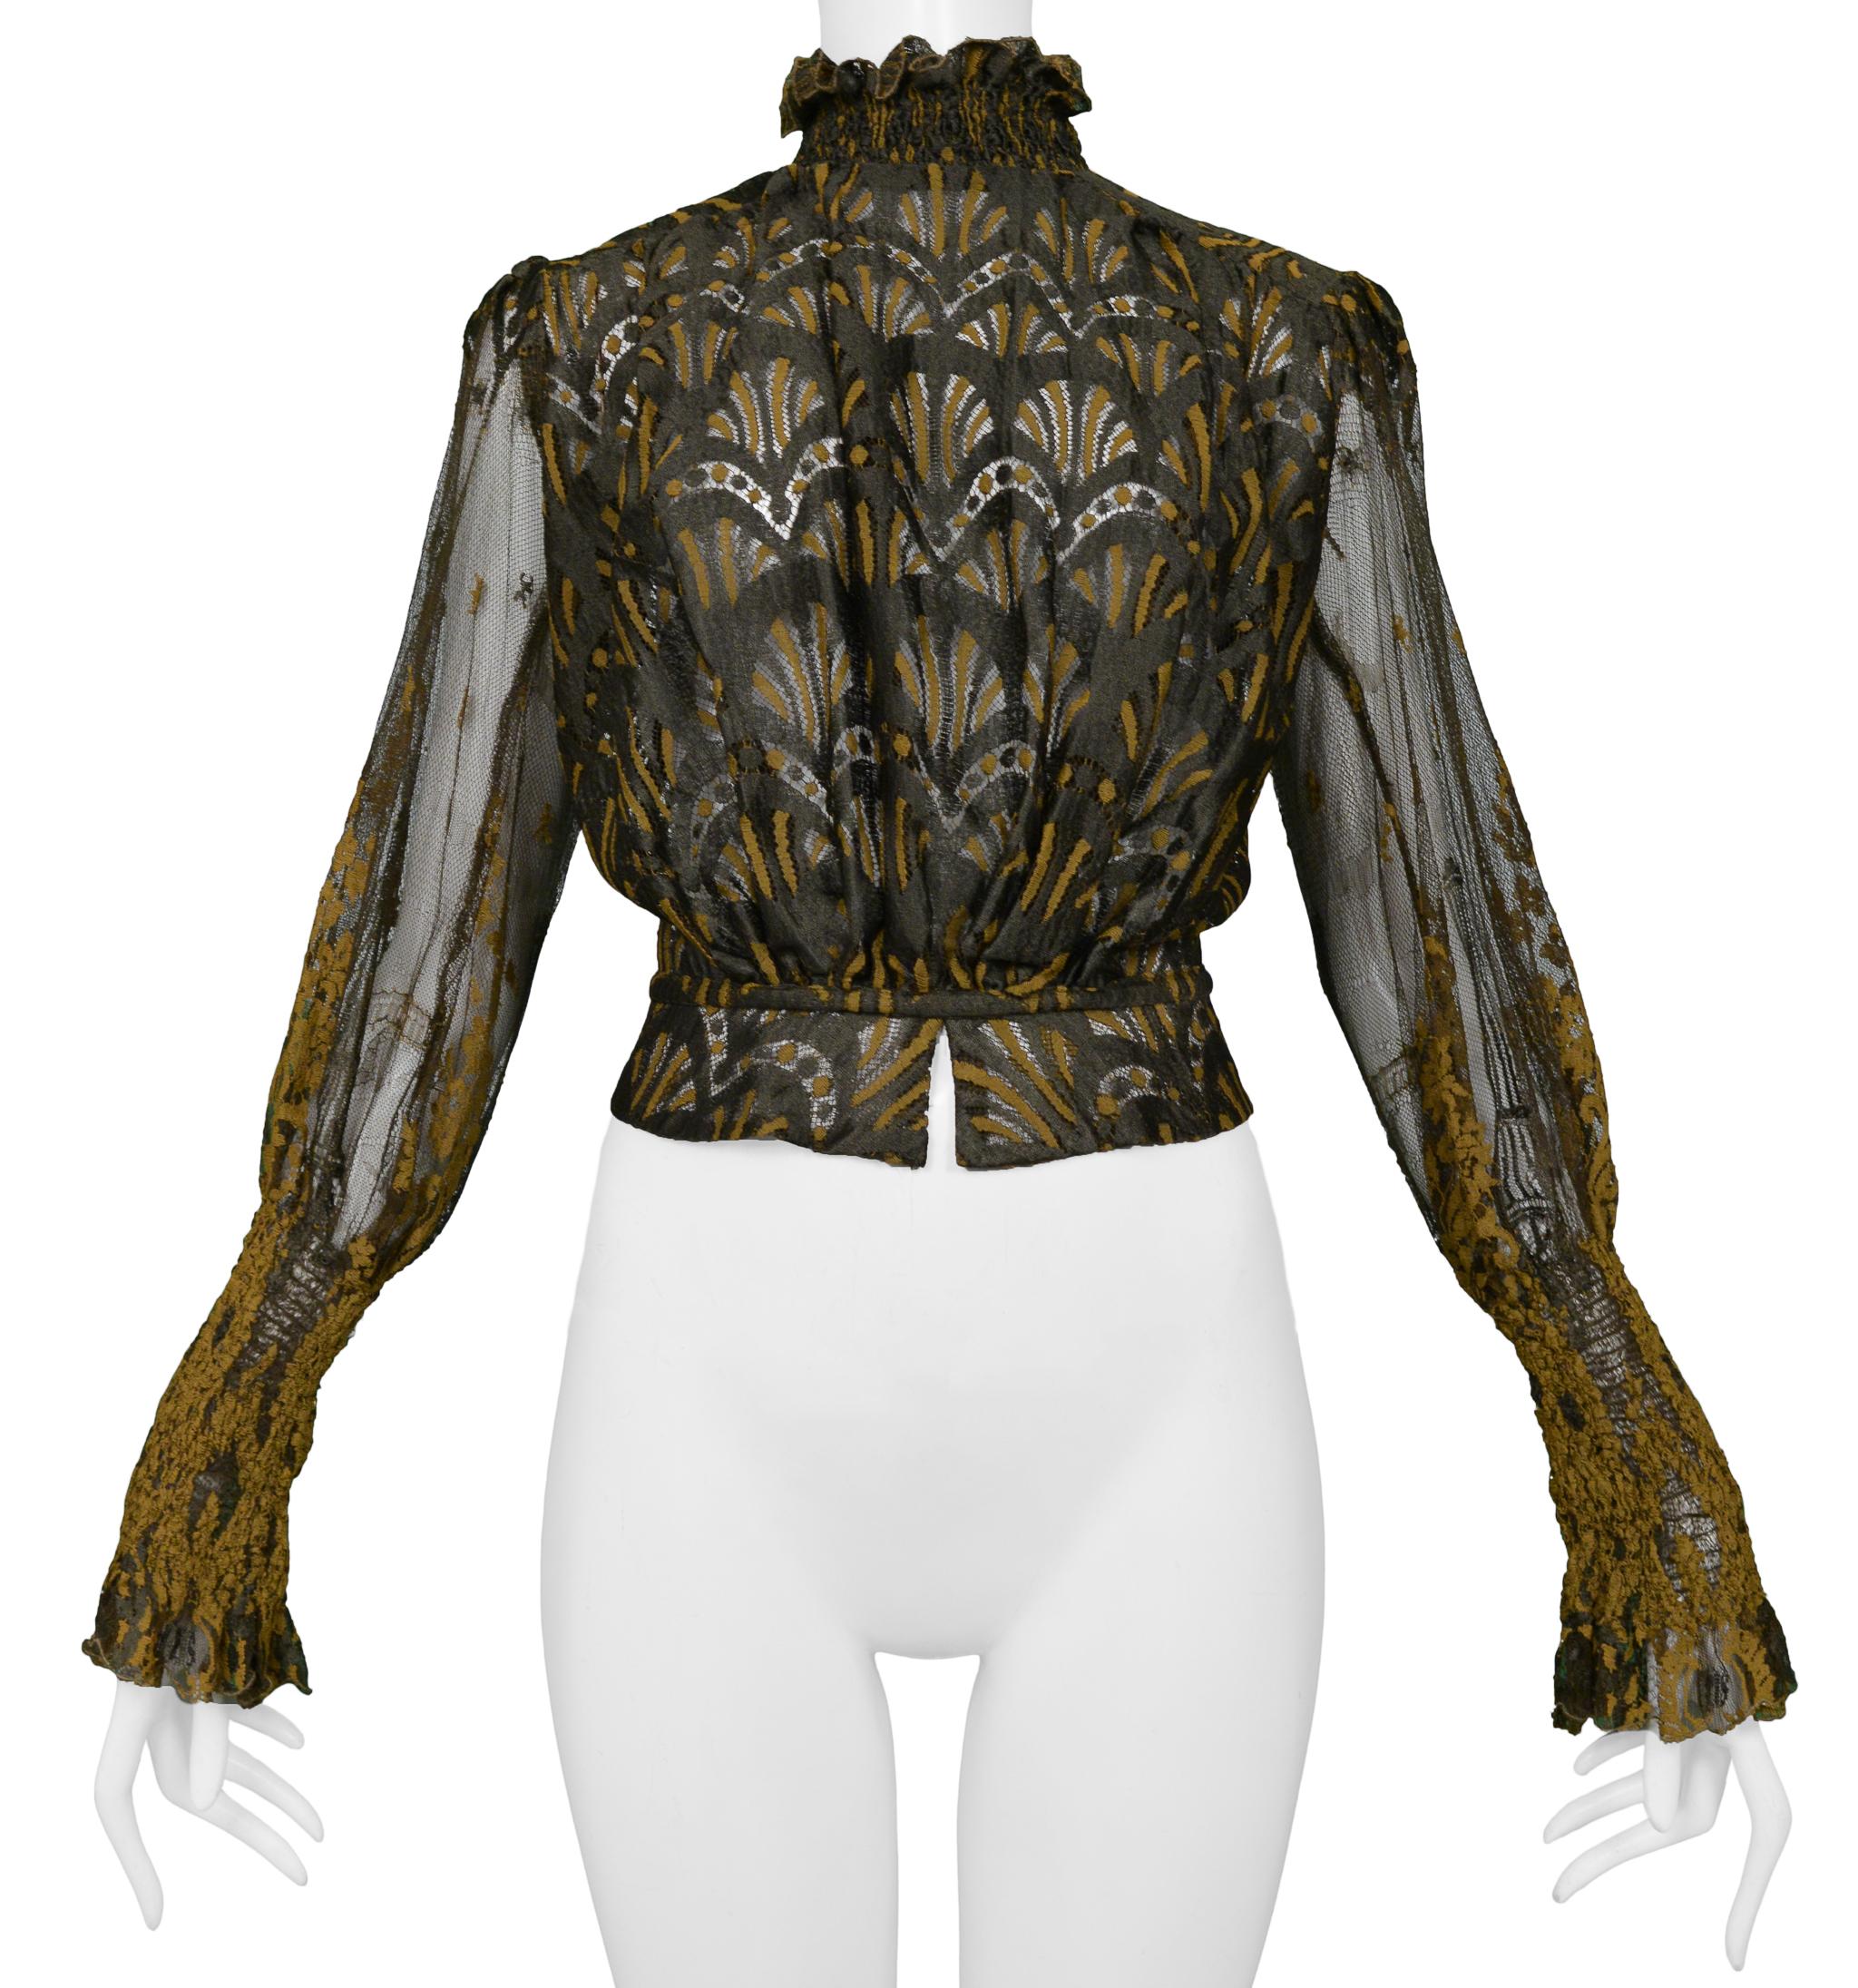 Resurrection Vintage is excited to offer a vintage Jean Paul Gaultier lace blouse featuring puff sleeves, a zipper down the back, and a ruffled high neck.

Jean Paul Gaultier
Size: 42
Nylon, Polyester
Excellent Vintage Condition 
Authenticity